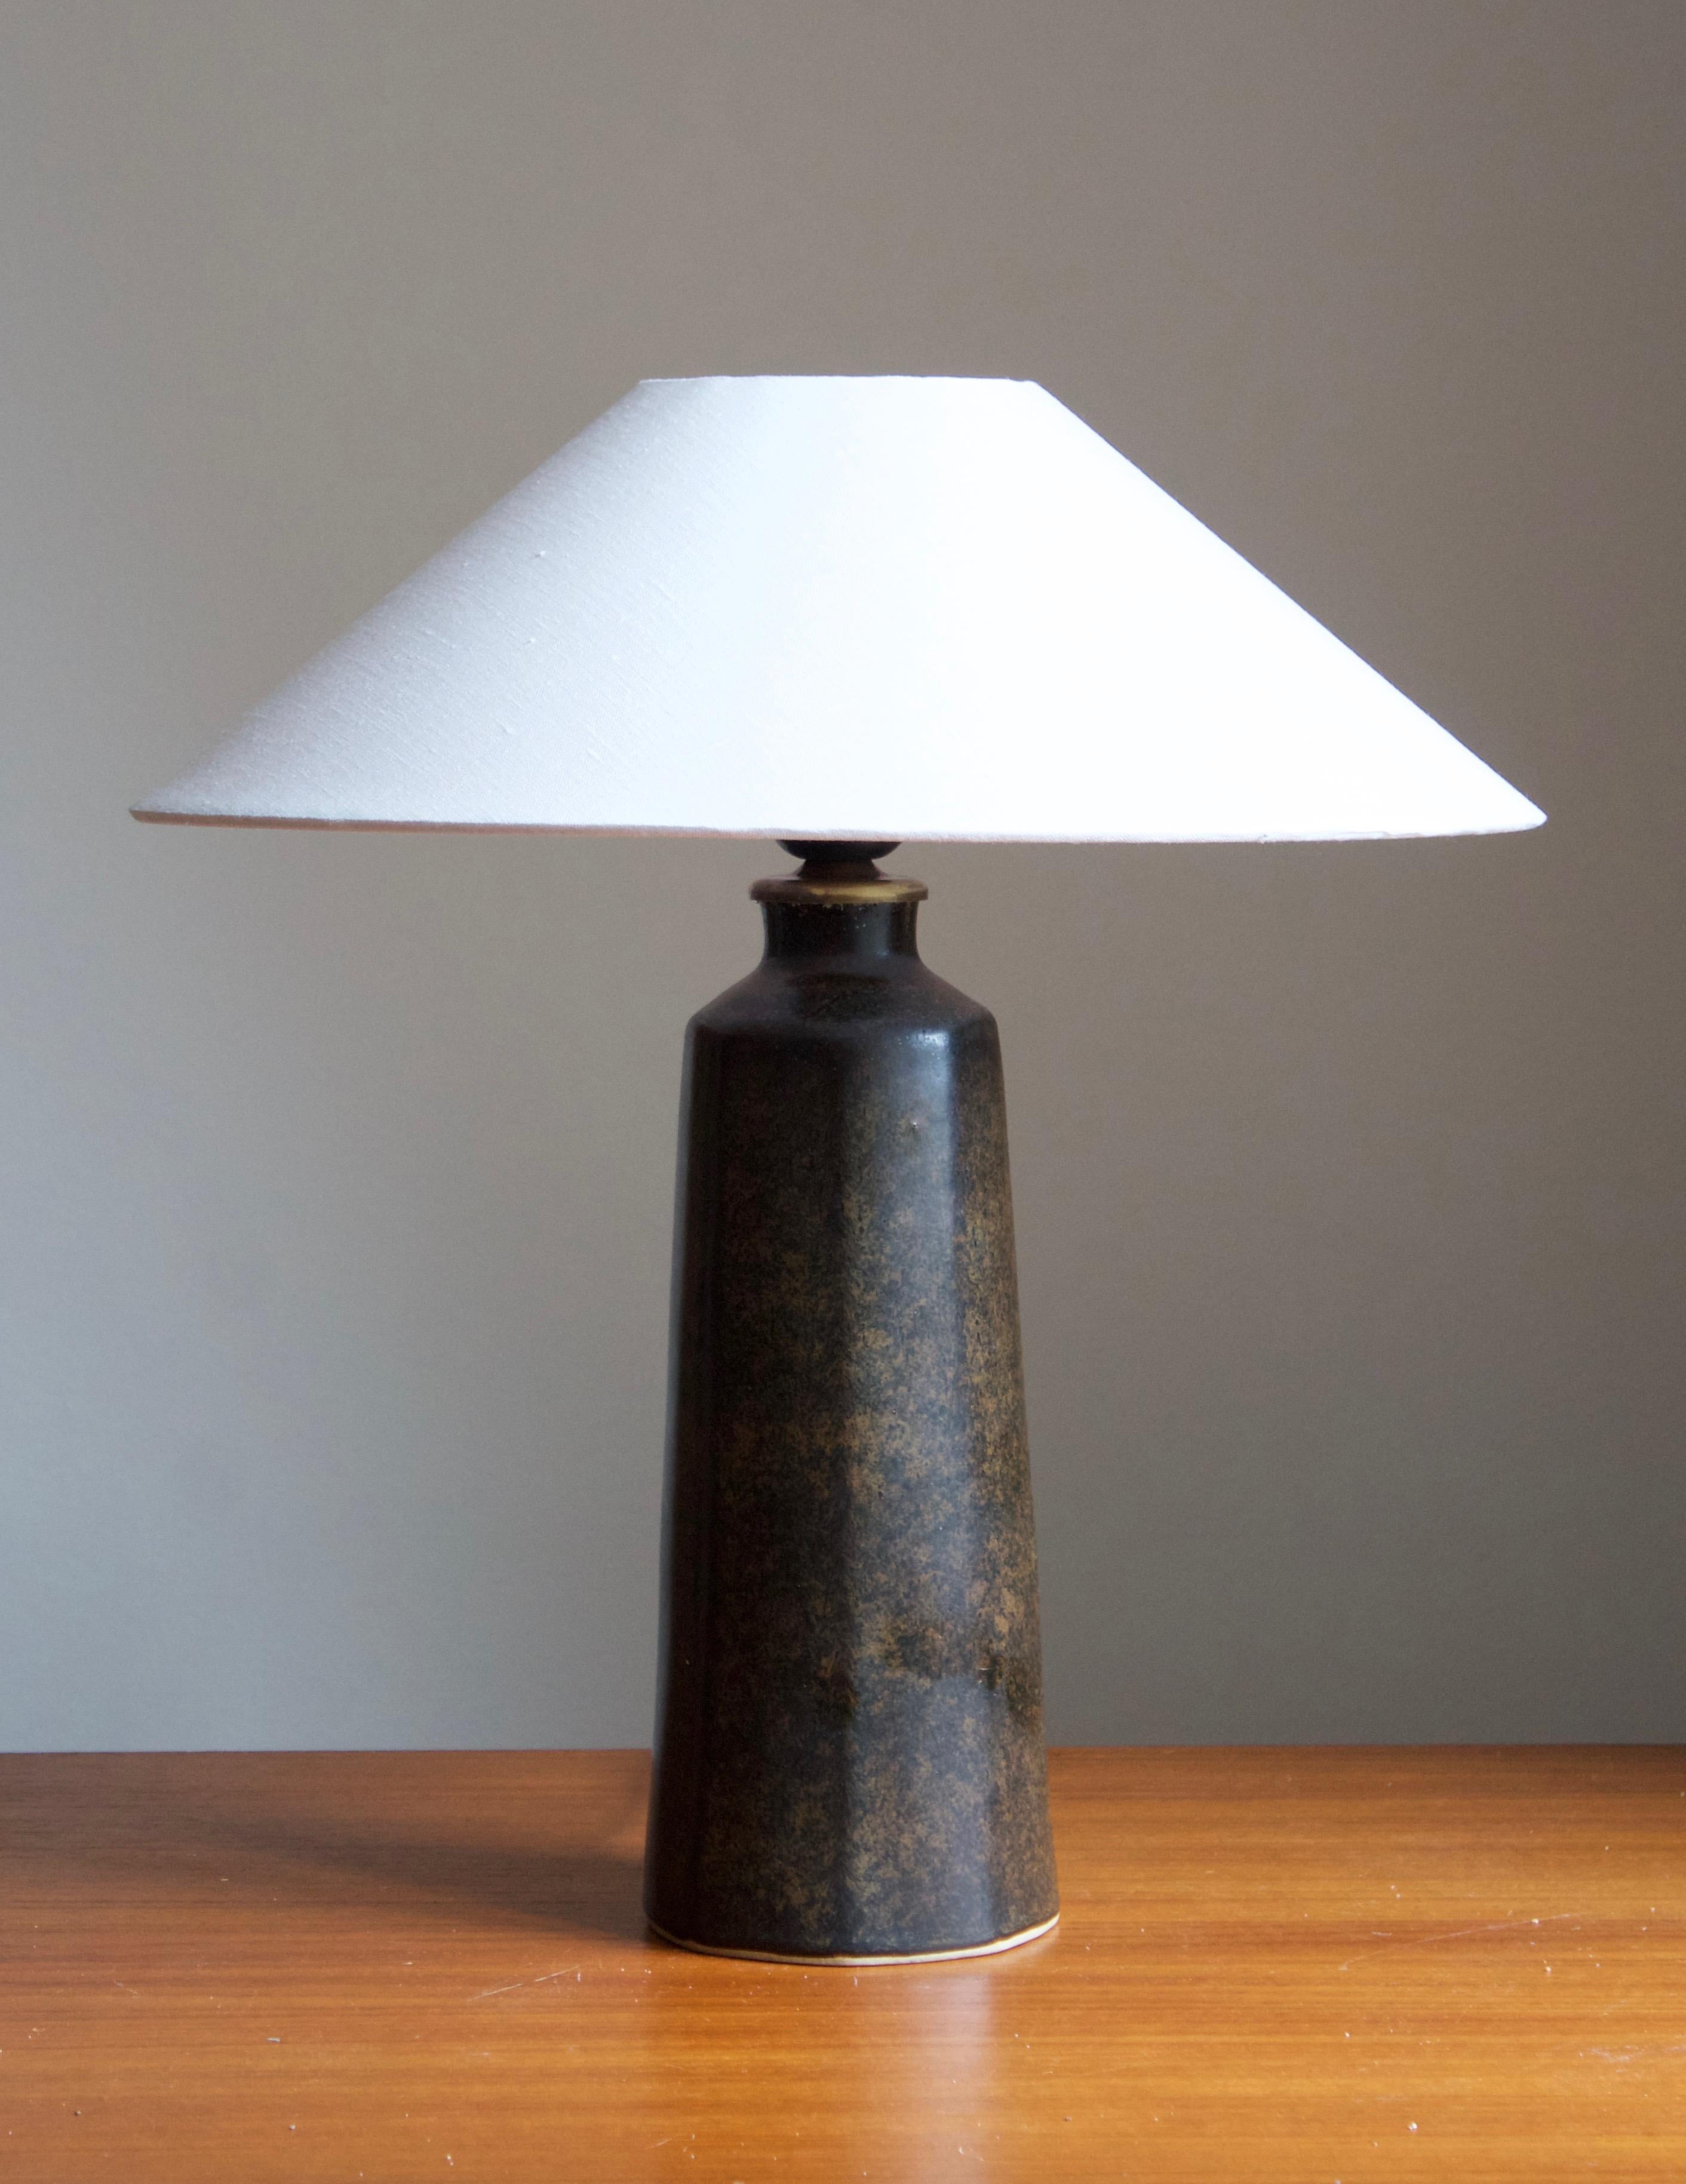 A table lamp by Carl-Harry Stålhane for the Swedish firm Rörstrand. 

Stated dimensions exclude lampshades. Height includes socket. Shade is not included in purchase.

Glaze features a brown-green color.

Other ceramicists of the period include